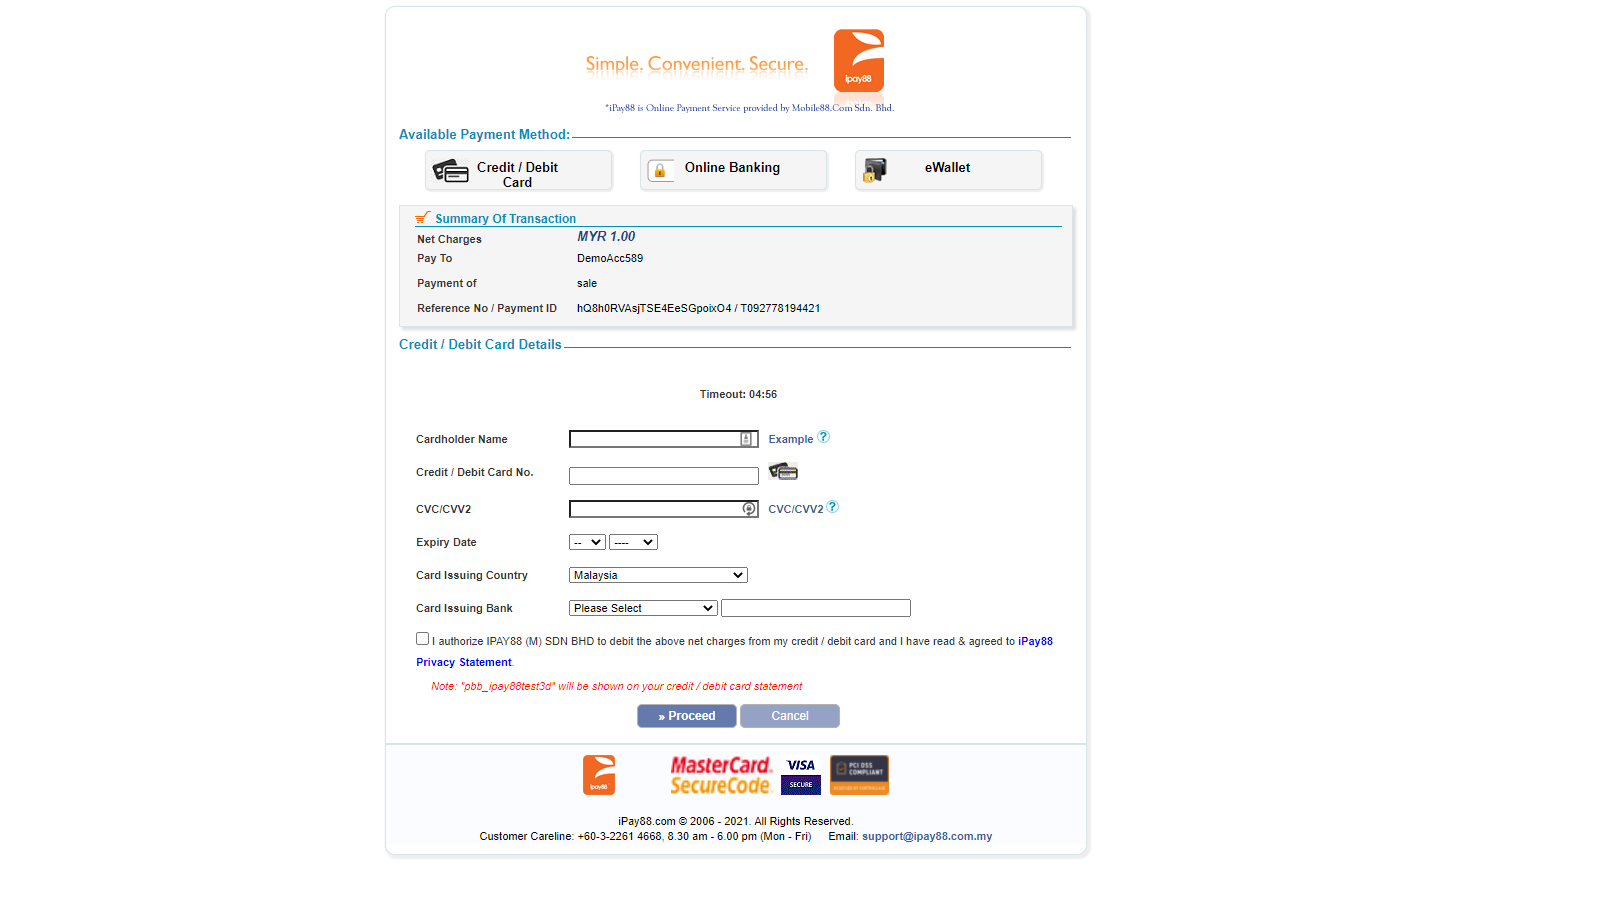 iPay88 credit card payment page